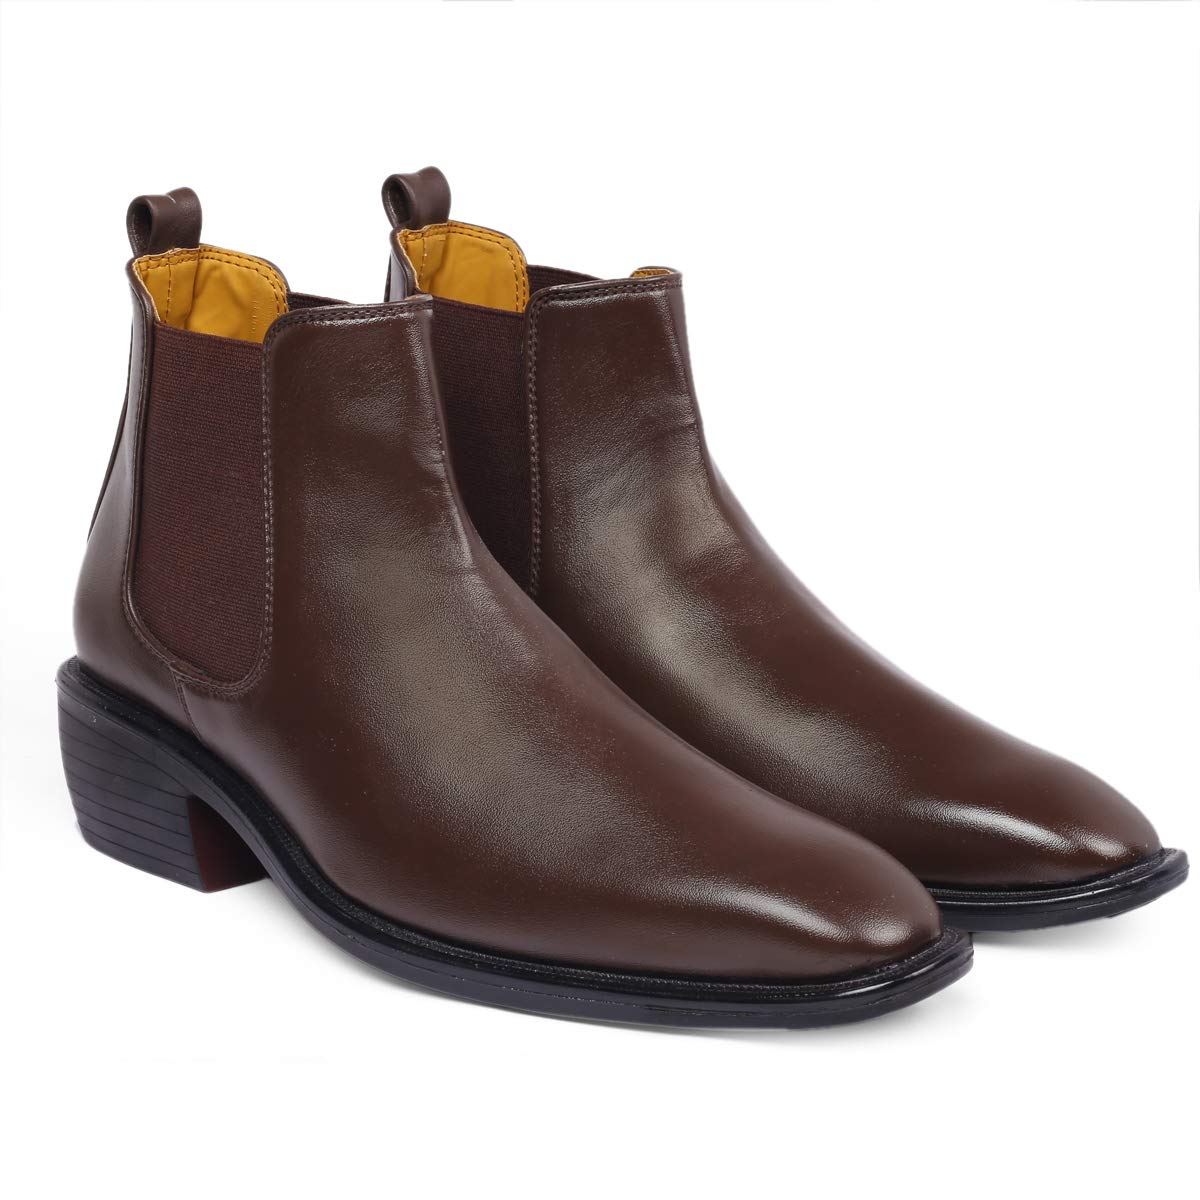 Classy Hight Ankle Height Increasing Brown Chelsea Boots For Men-Unique and Classy